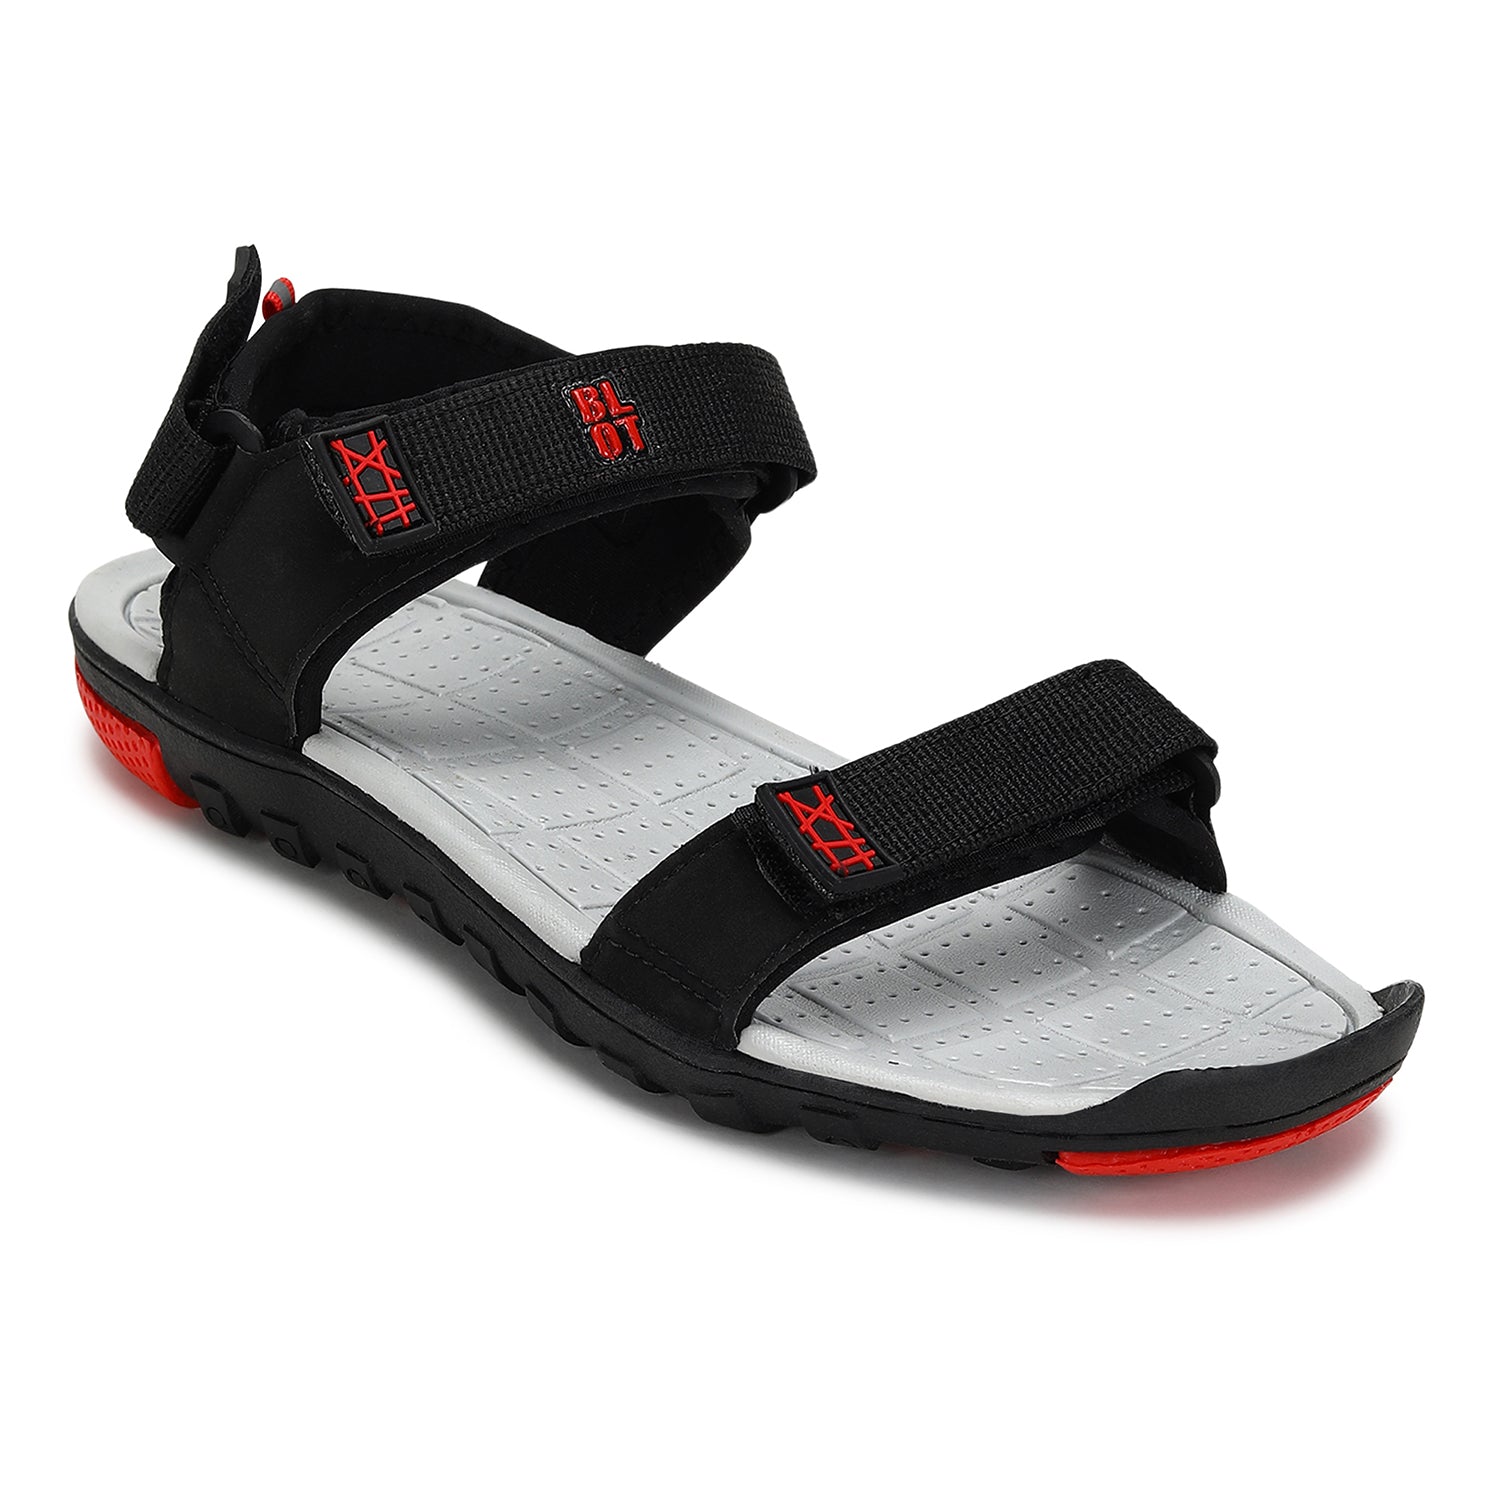 Paragon Blot K1407G Men Stylish Sandals | Comfortable Sandals for Daily Outdoor Use | Casual Formal Sandals with Cushioned Soles